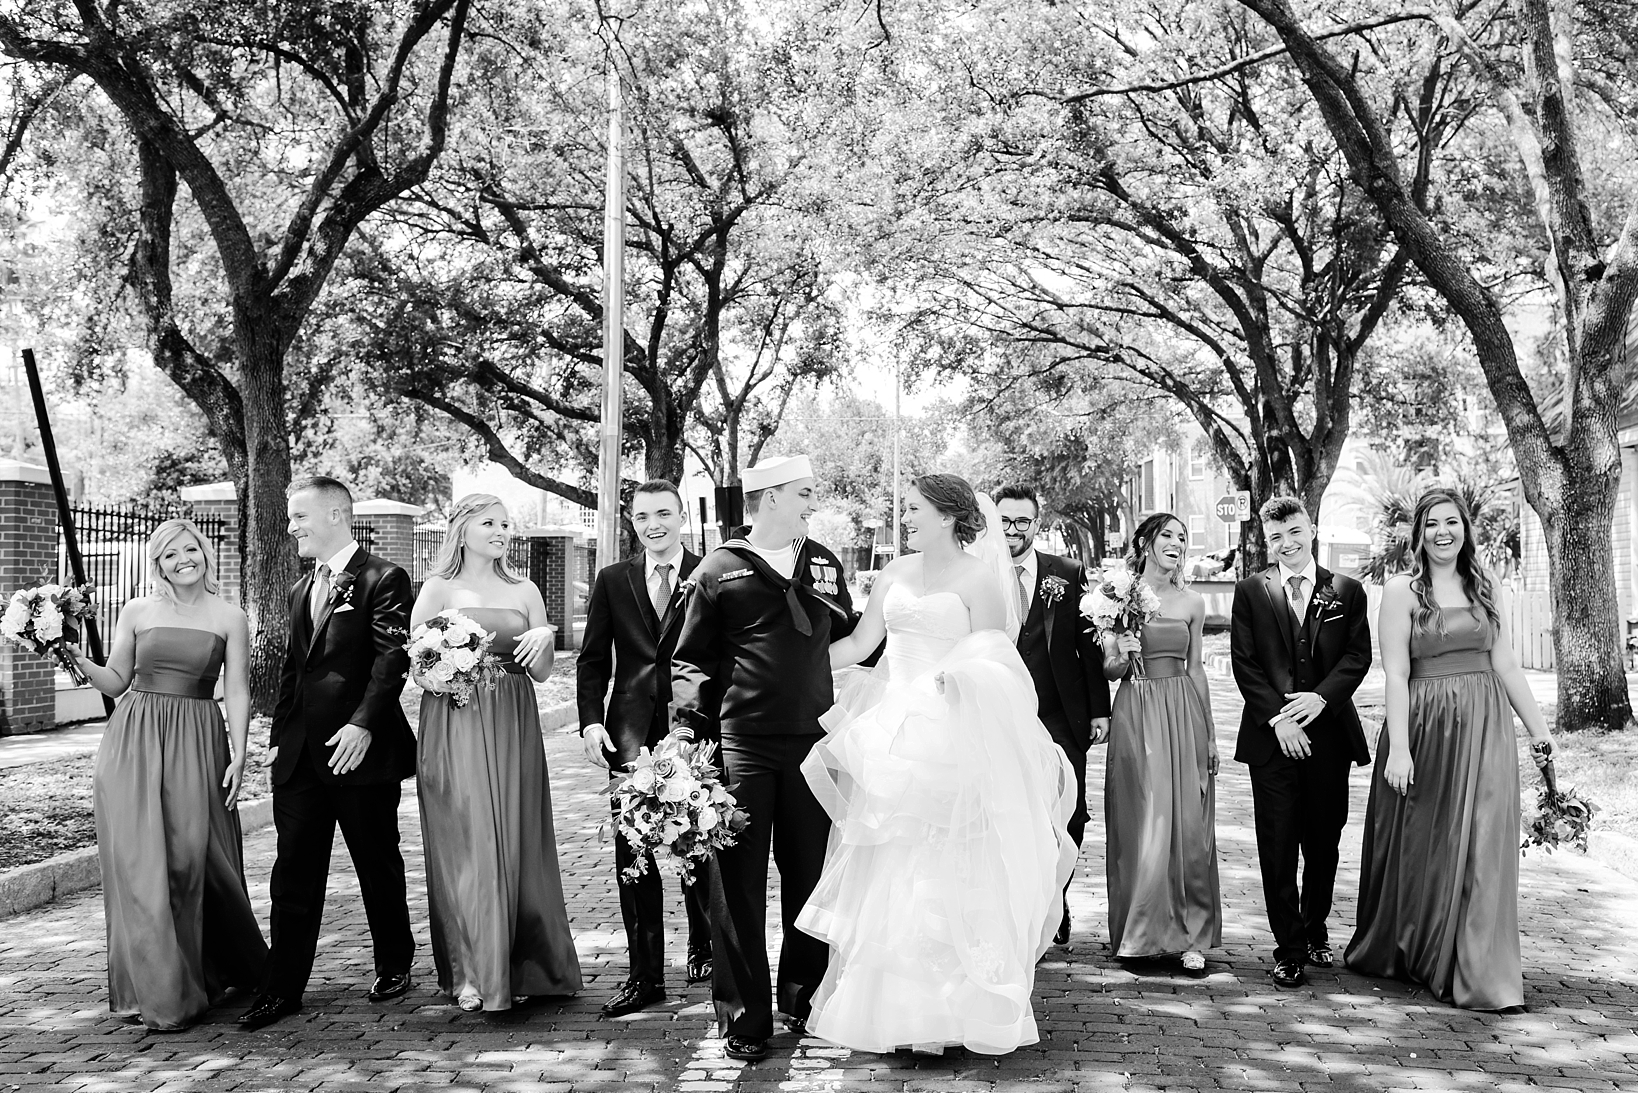 The bridal party walking down the street under the old oak trees